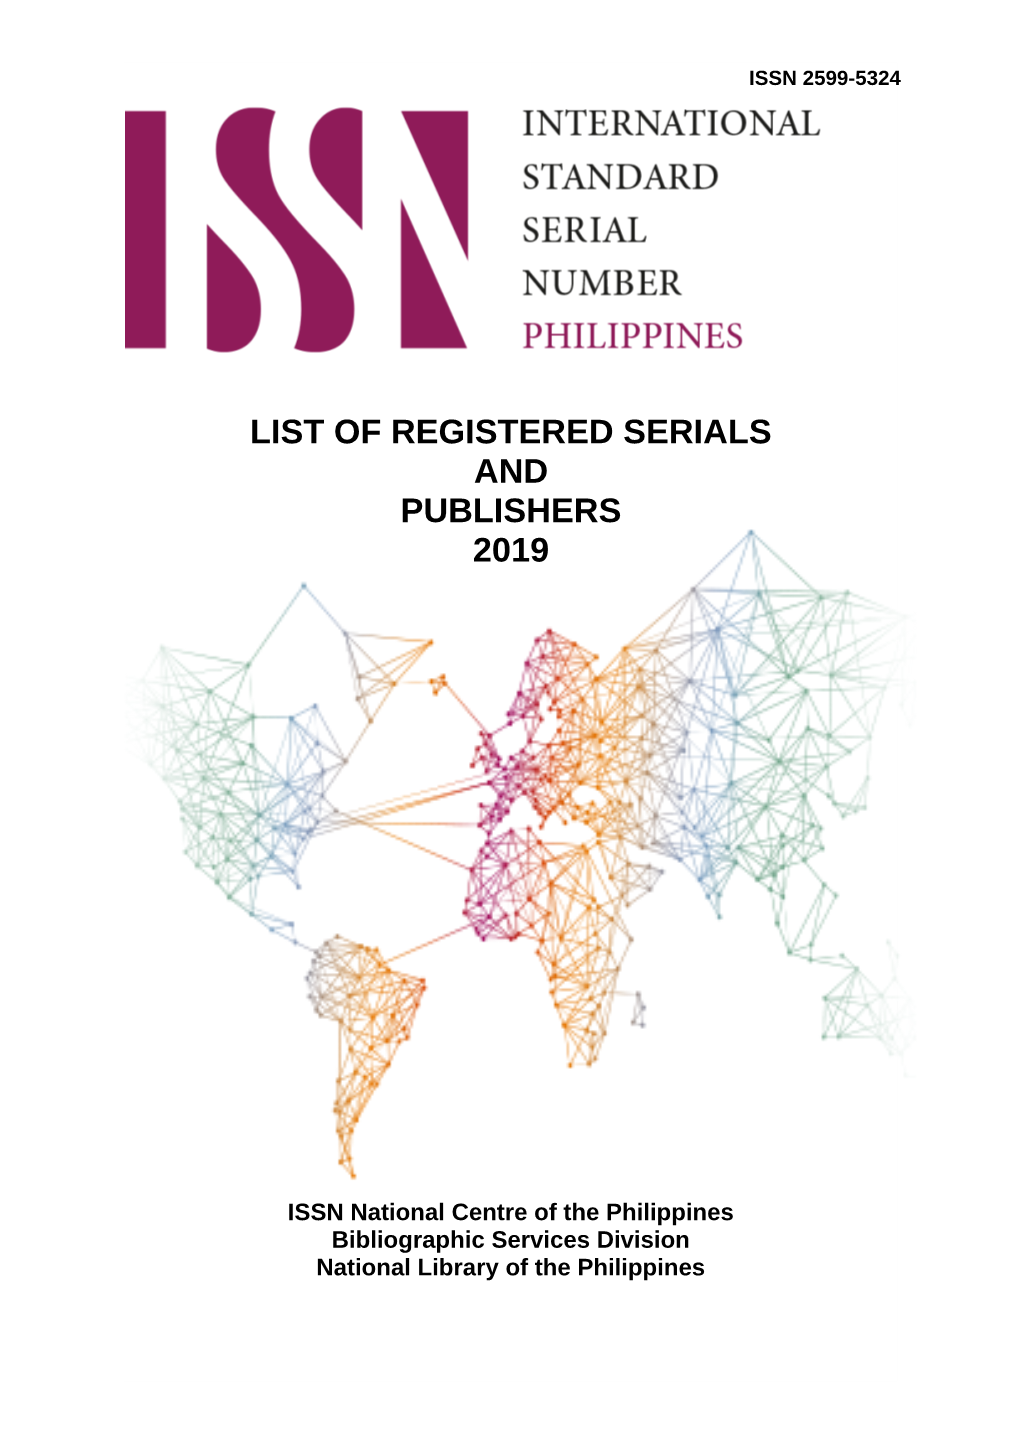 List of Registered Serials and Publishers 2019